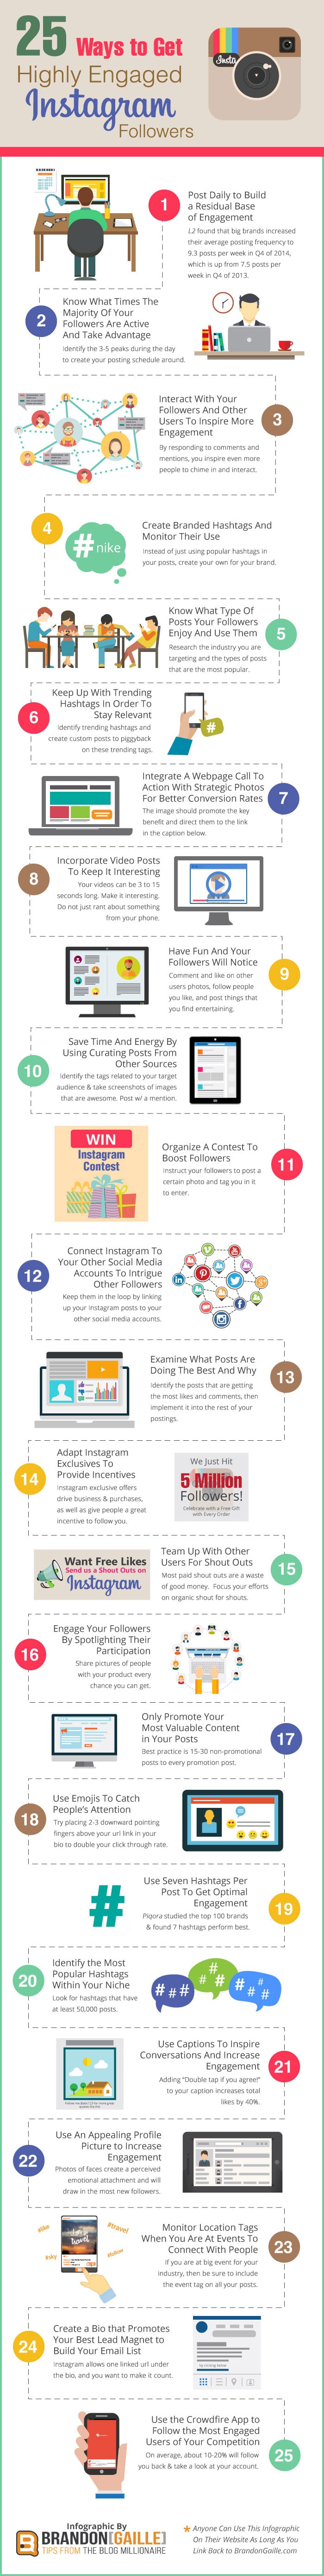 Get Engaging Instagram Followers Infographic